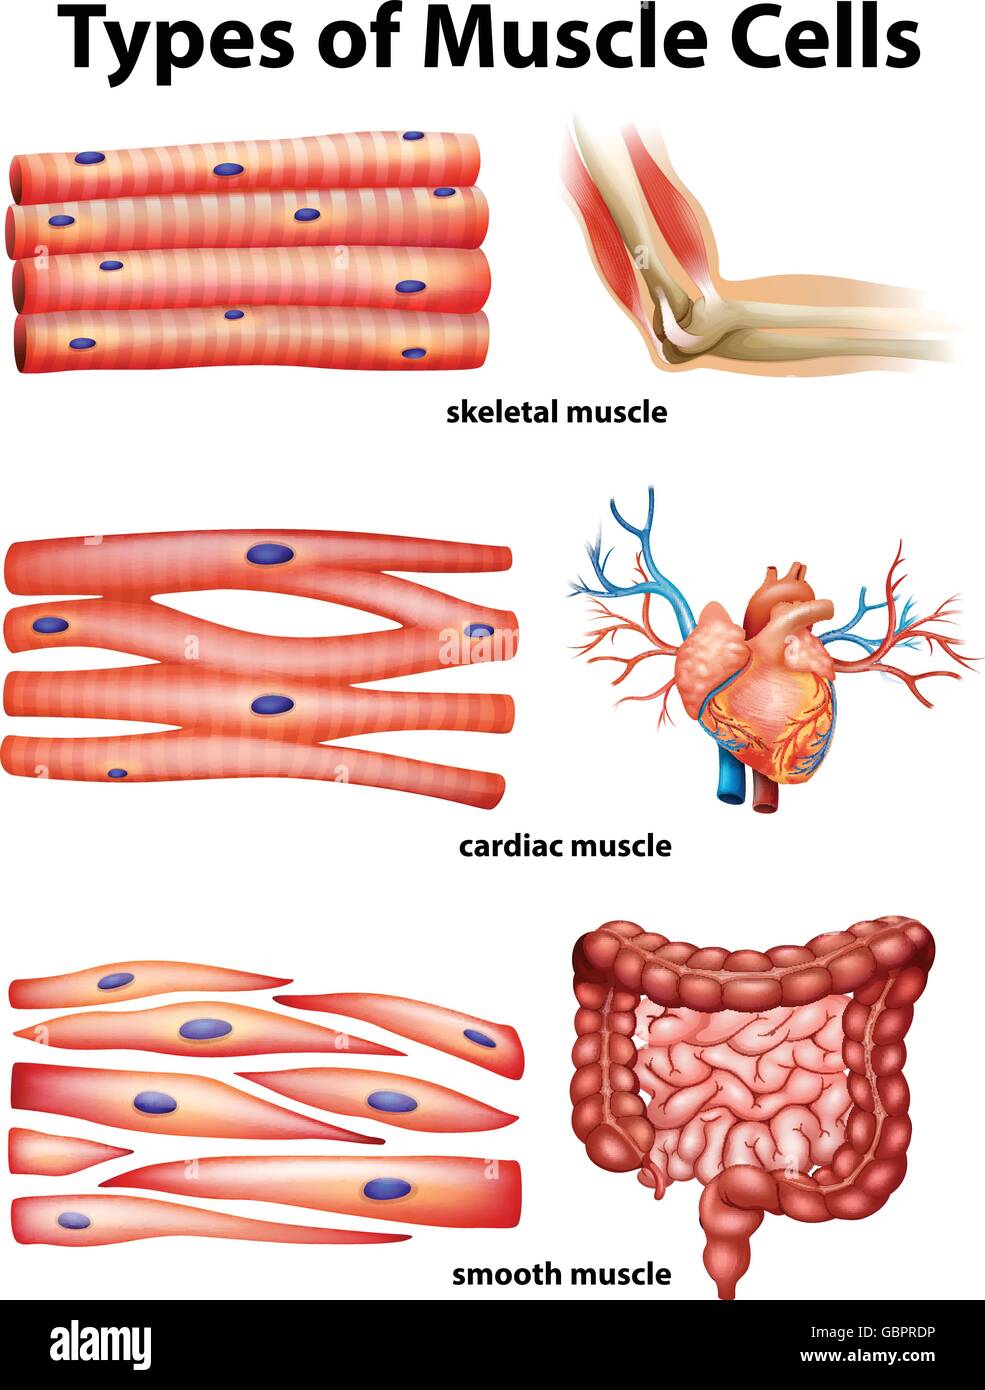 Diagram showing types of muscle cells illustration Stock ...